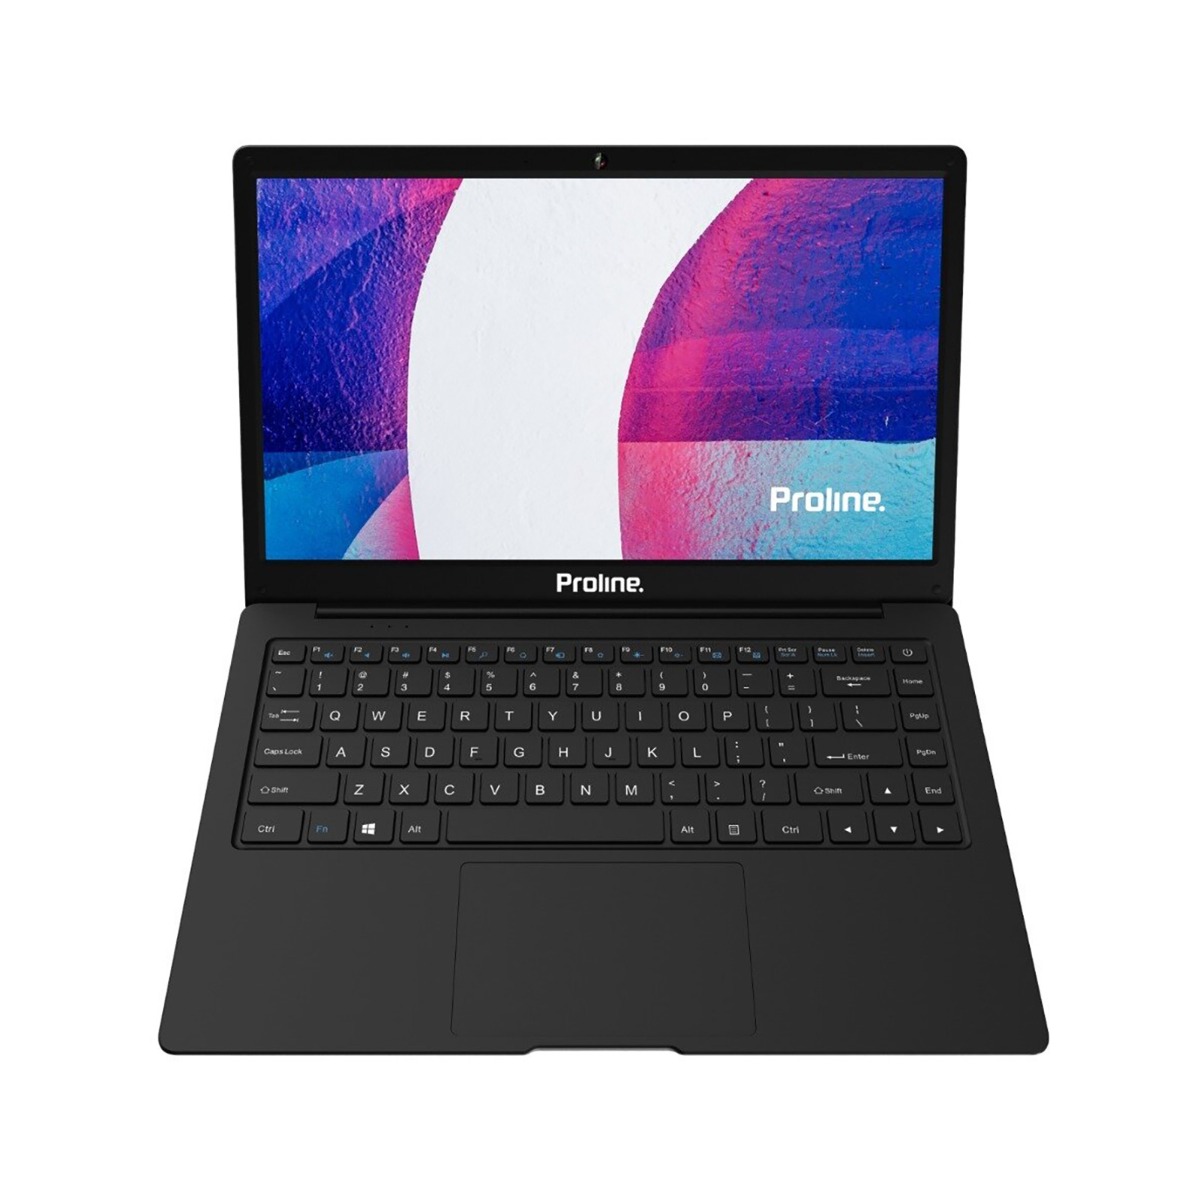 Proline-V1465C4-LEWIS-Proline-V1465C4-LEWIS-V1465C4-LEWIS-Laptops | LaptopSA.co.za a division of the notebook company 